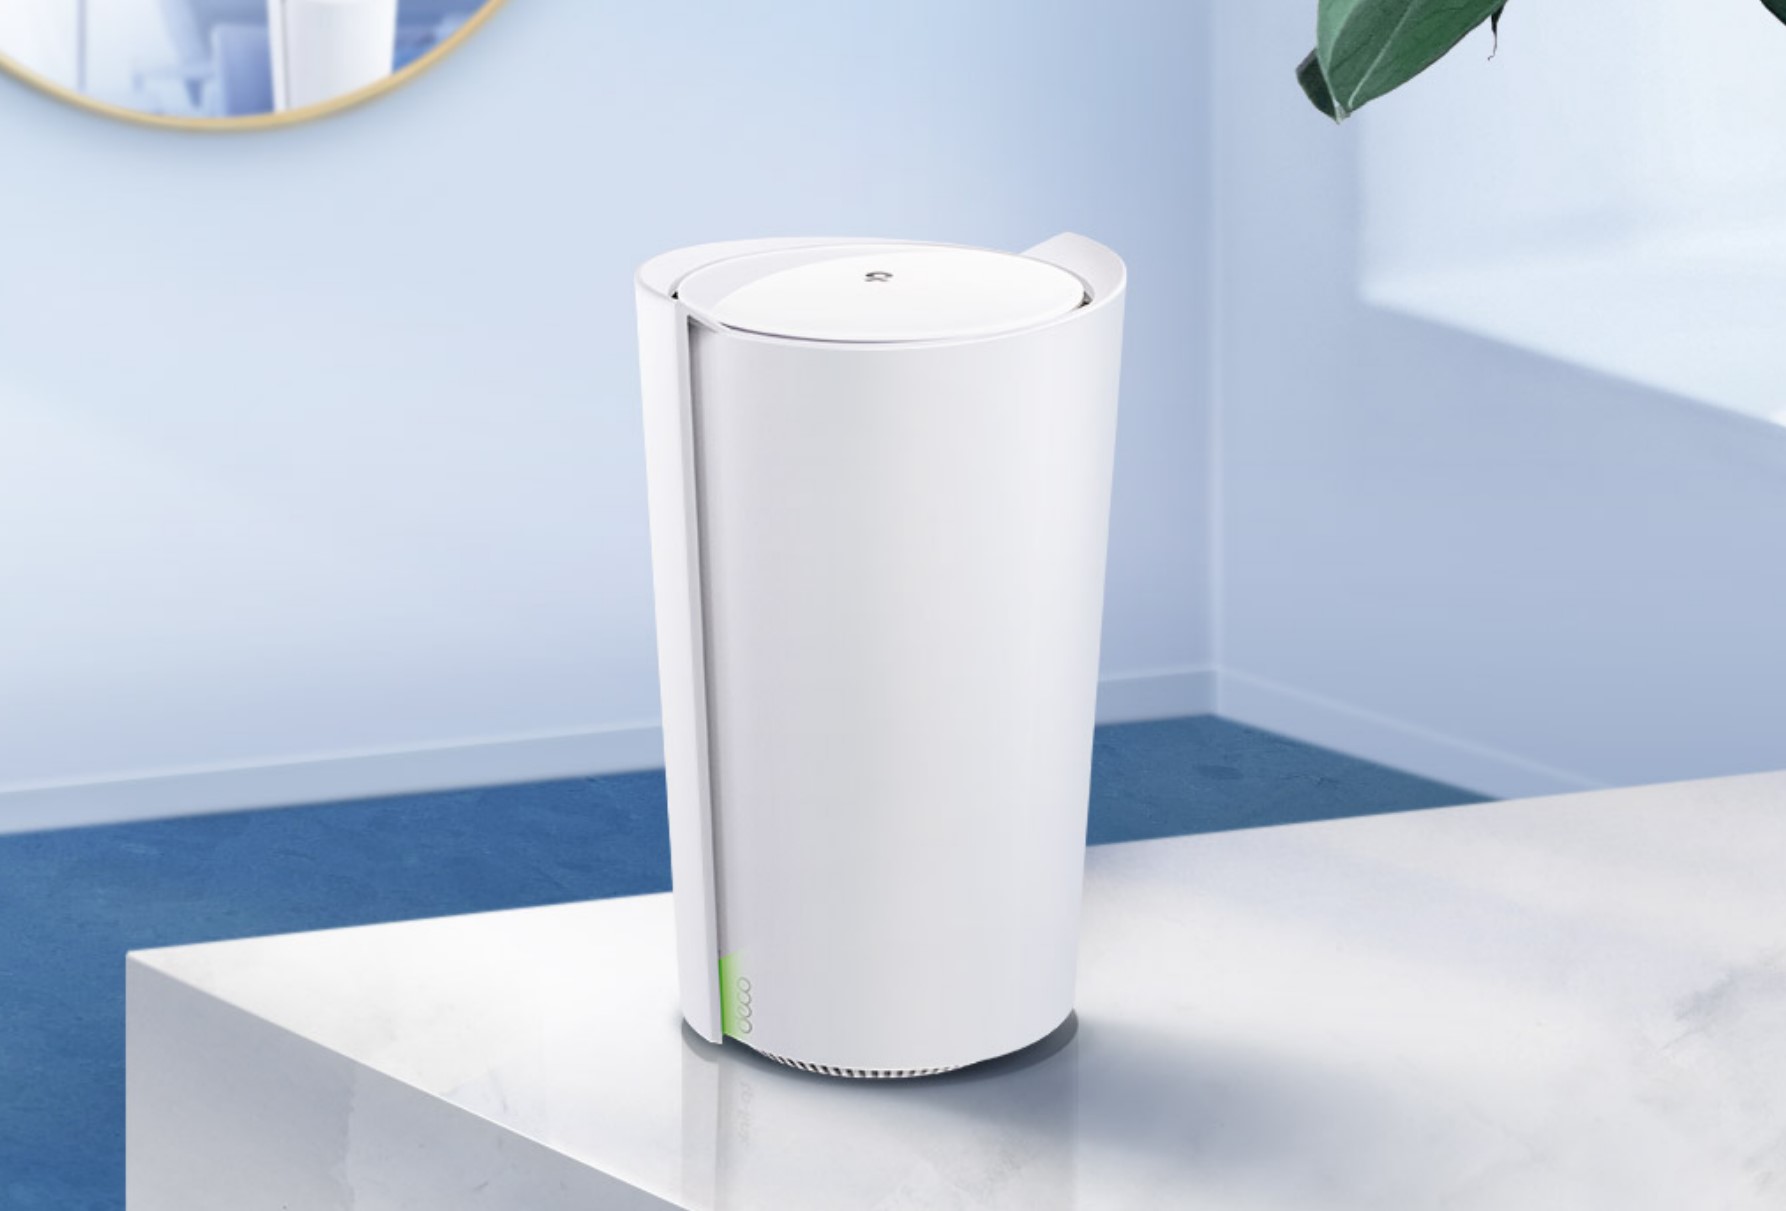 TP-Link Deco X90 AX6600 Mesh router is fast, very fast (review)